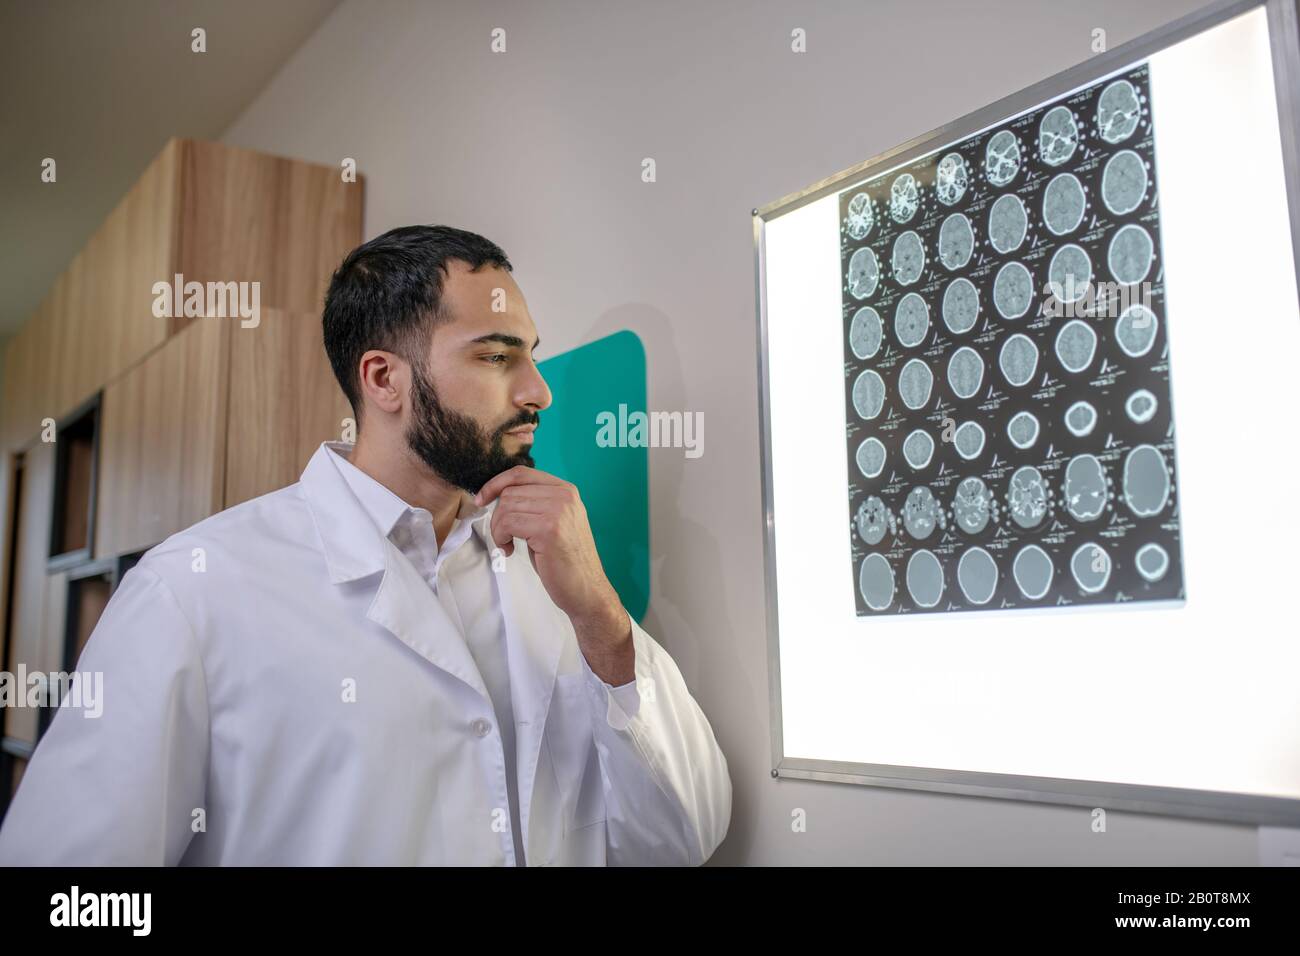 Bearded young doctor looking thoughtful while analyzing MRI results Stock Photo